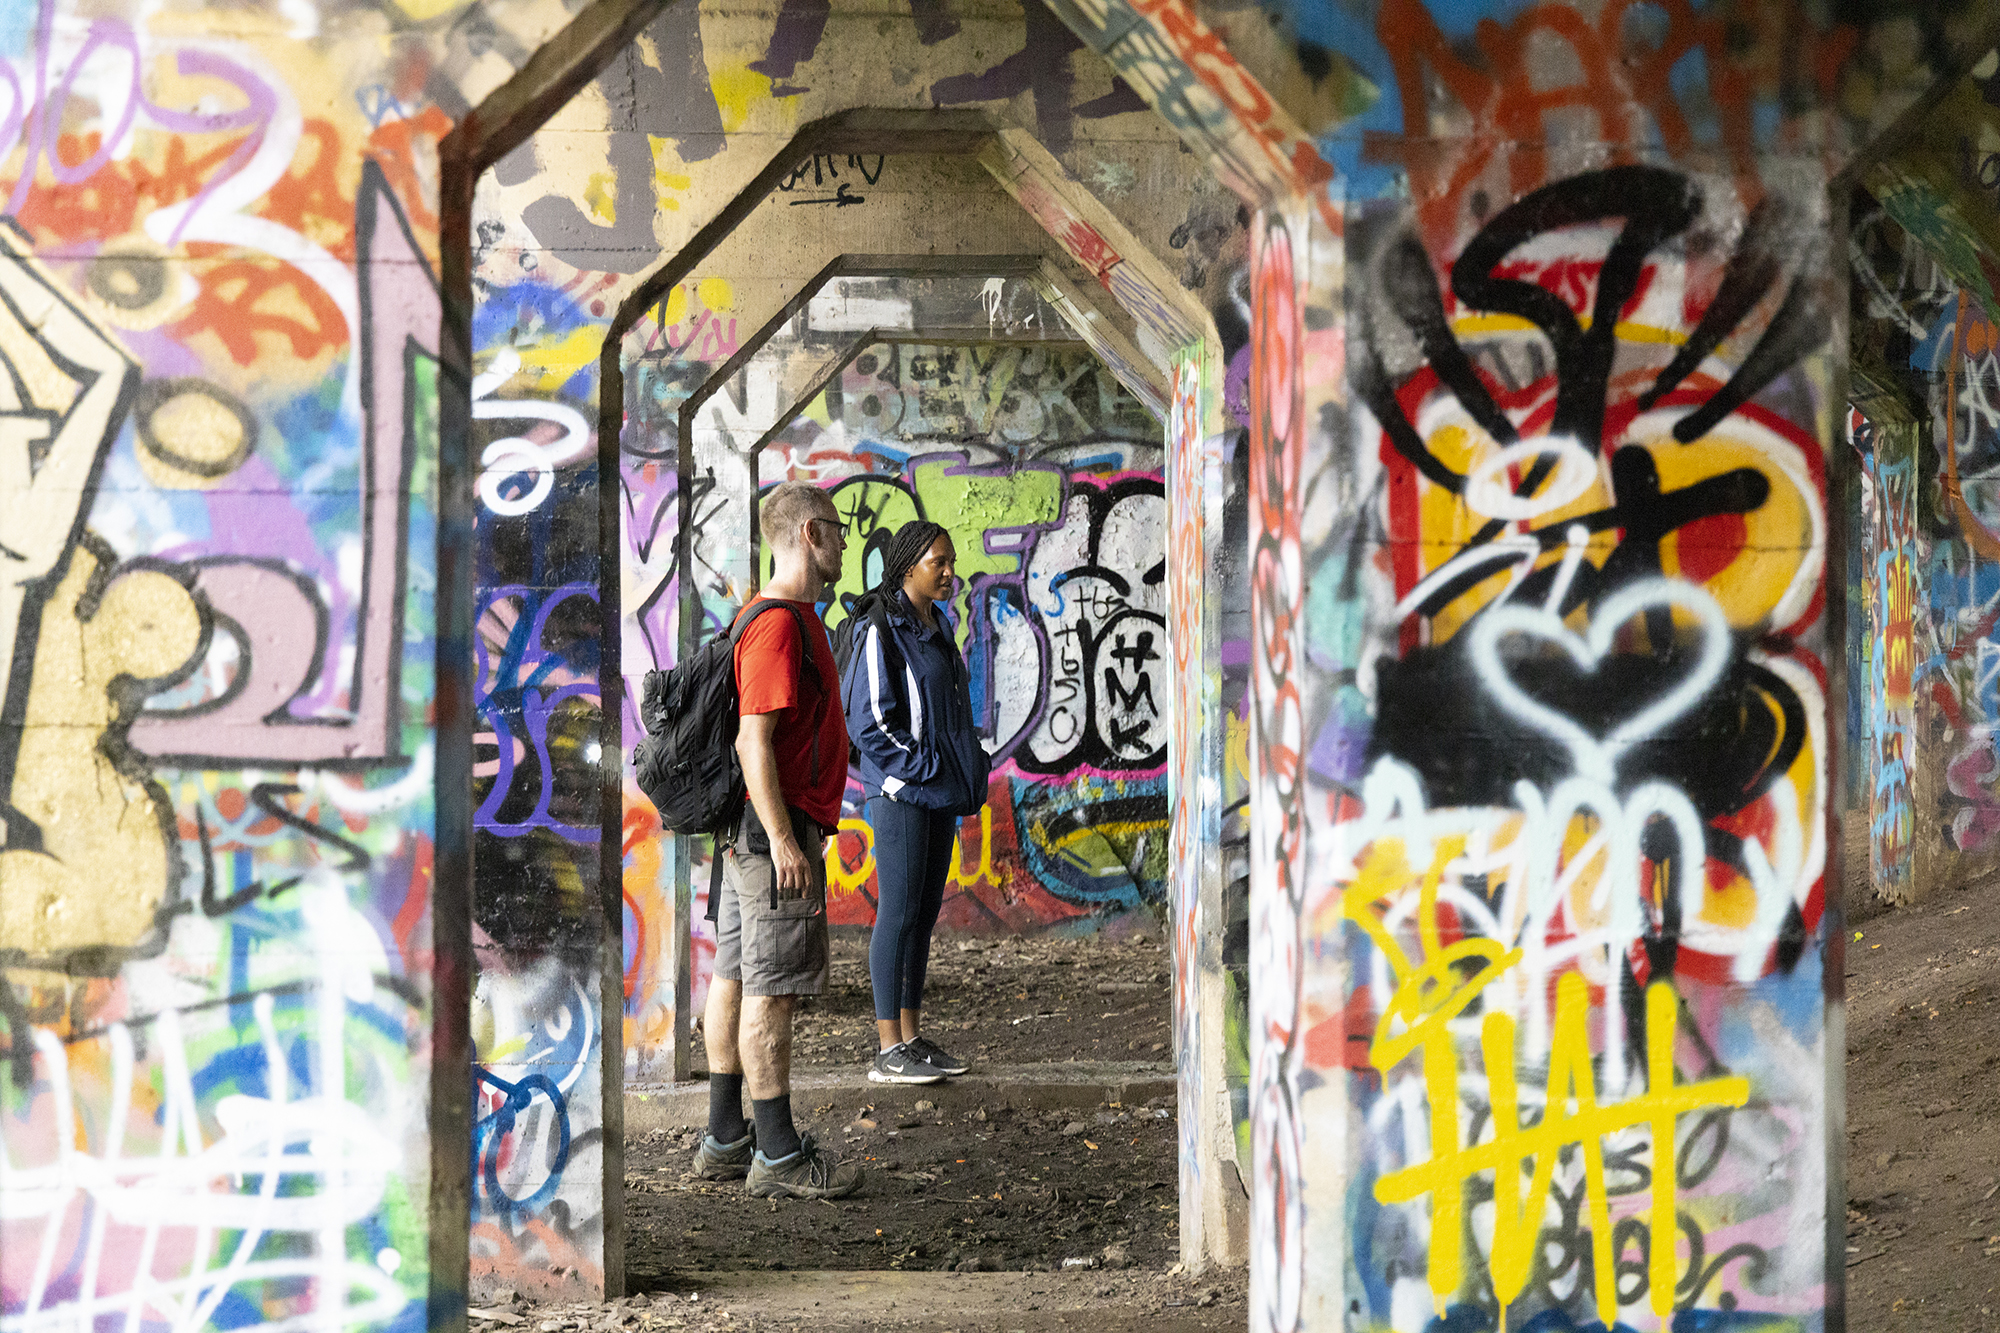 Two students stand among heavily graffitied underpass pillars in Philadelphia’s Graffiti Pier.